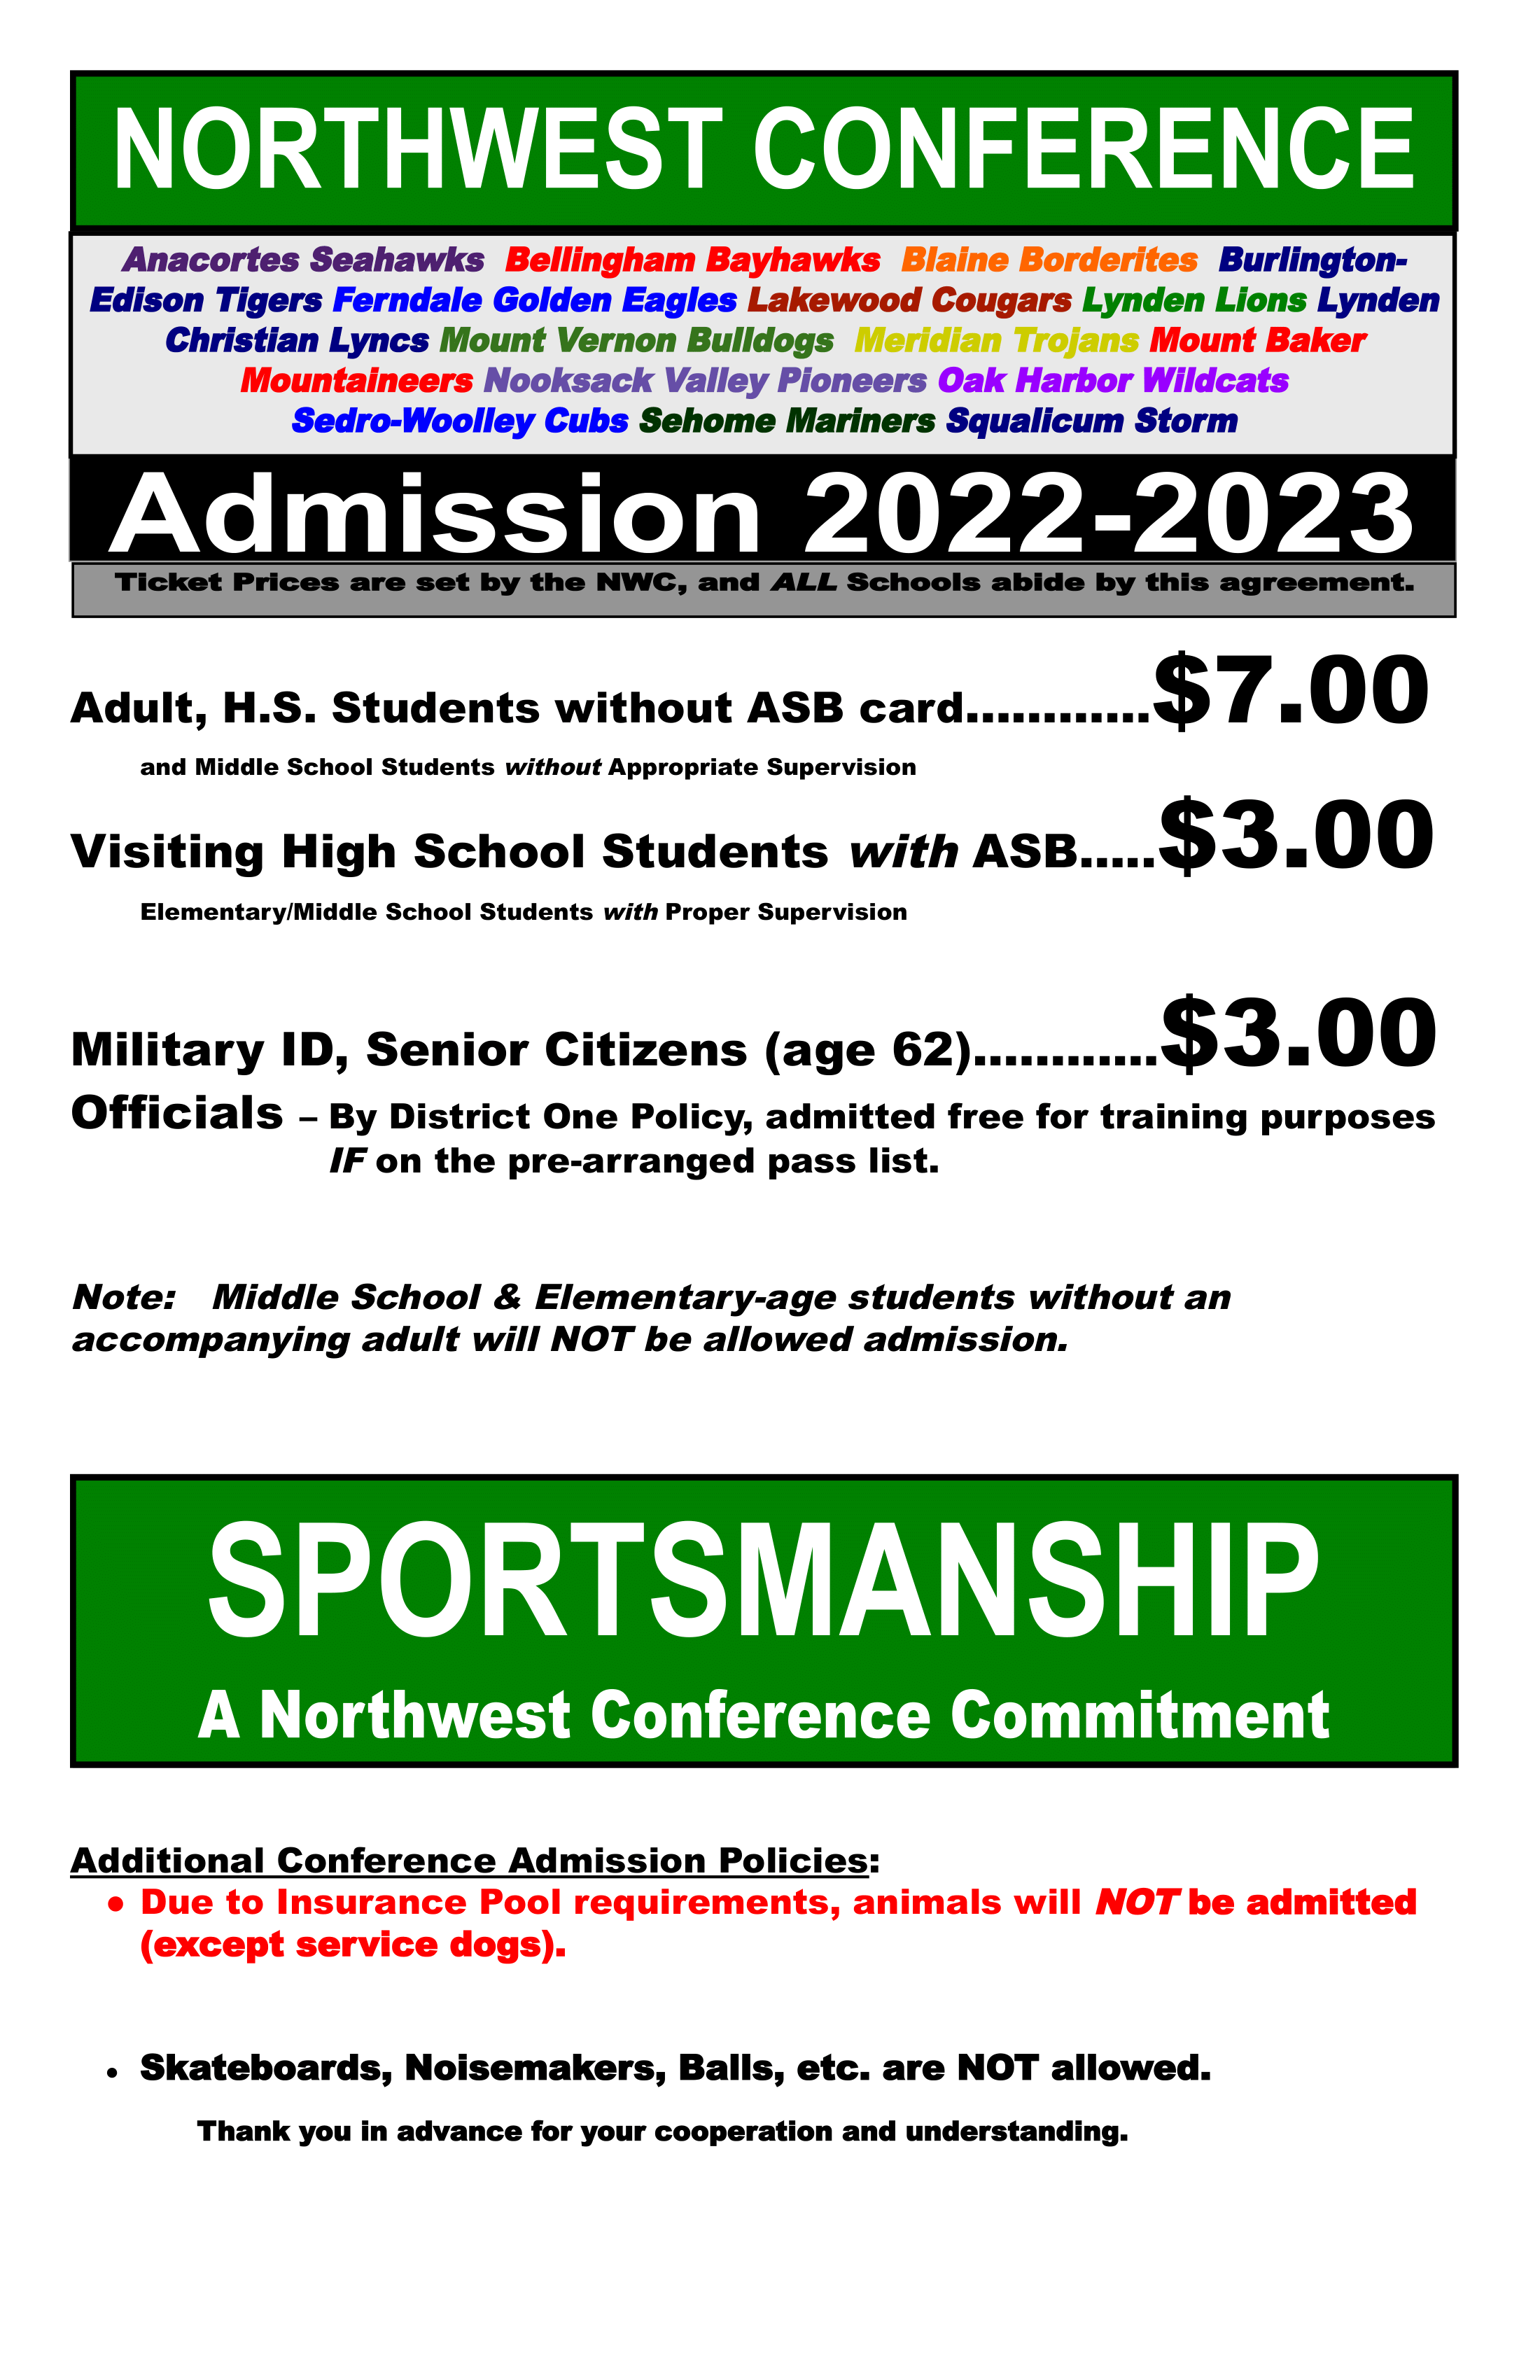 NW conference admission prices